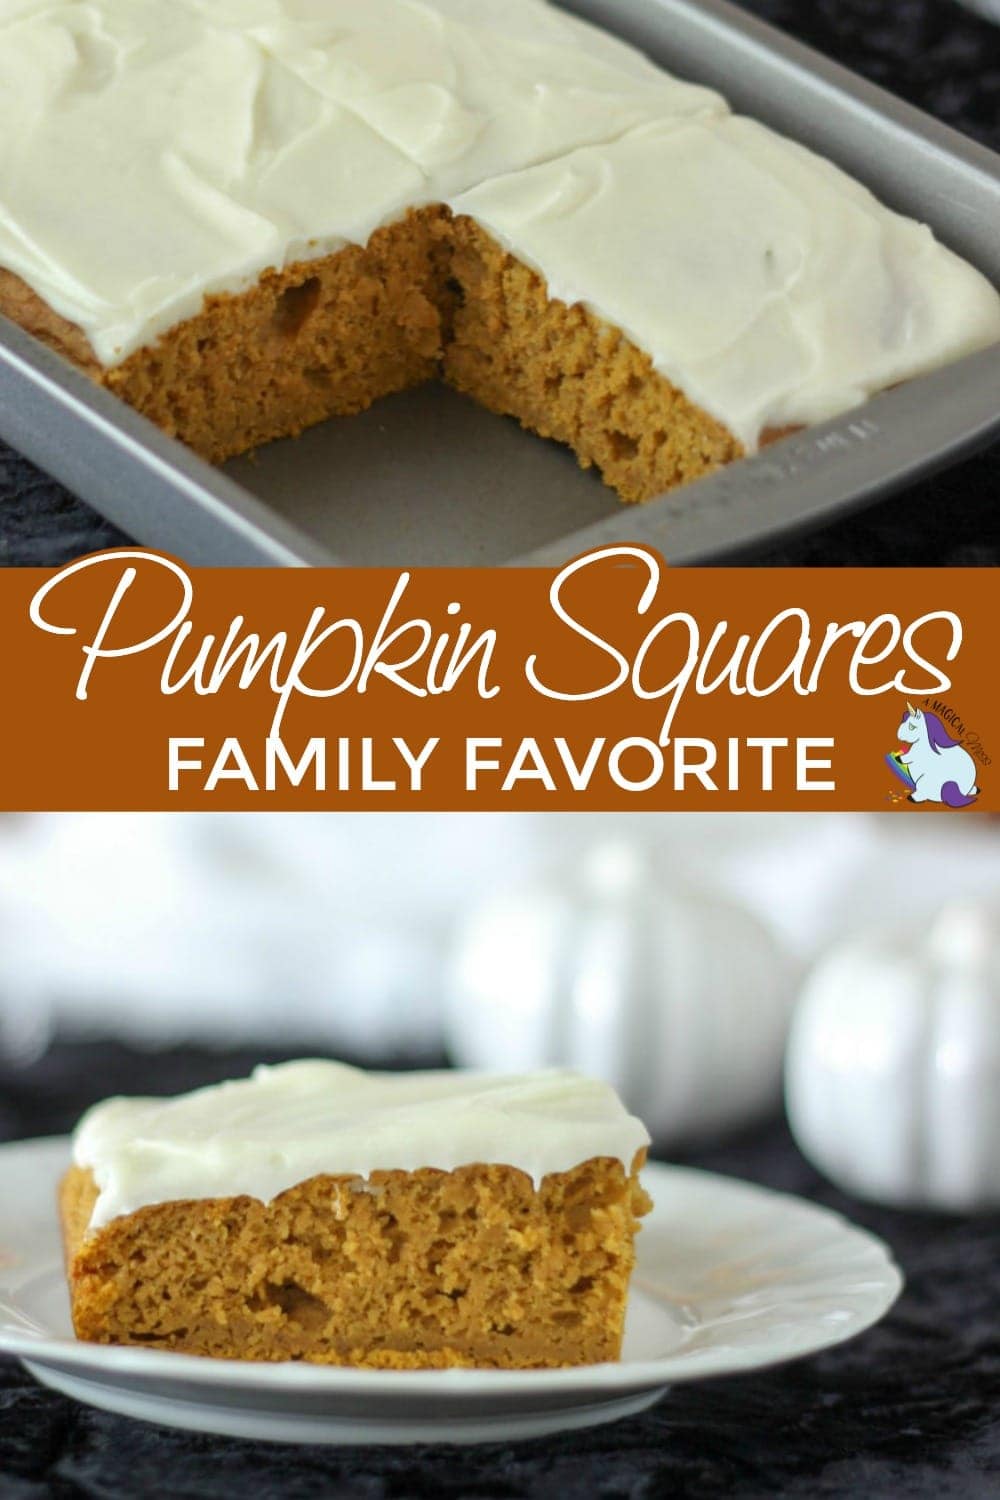 pumpkin cake slices in a pan and one on a plate